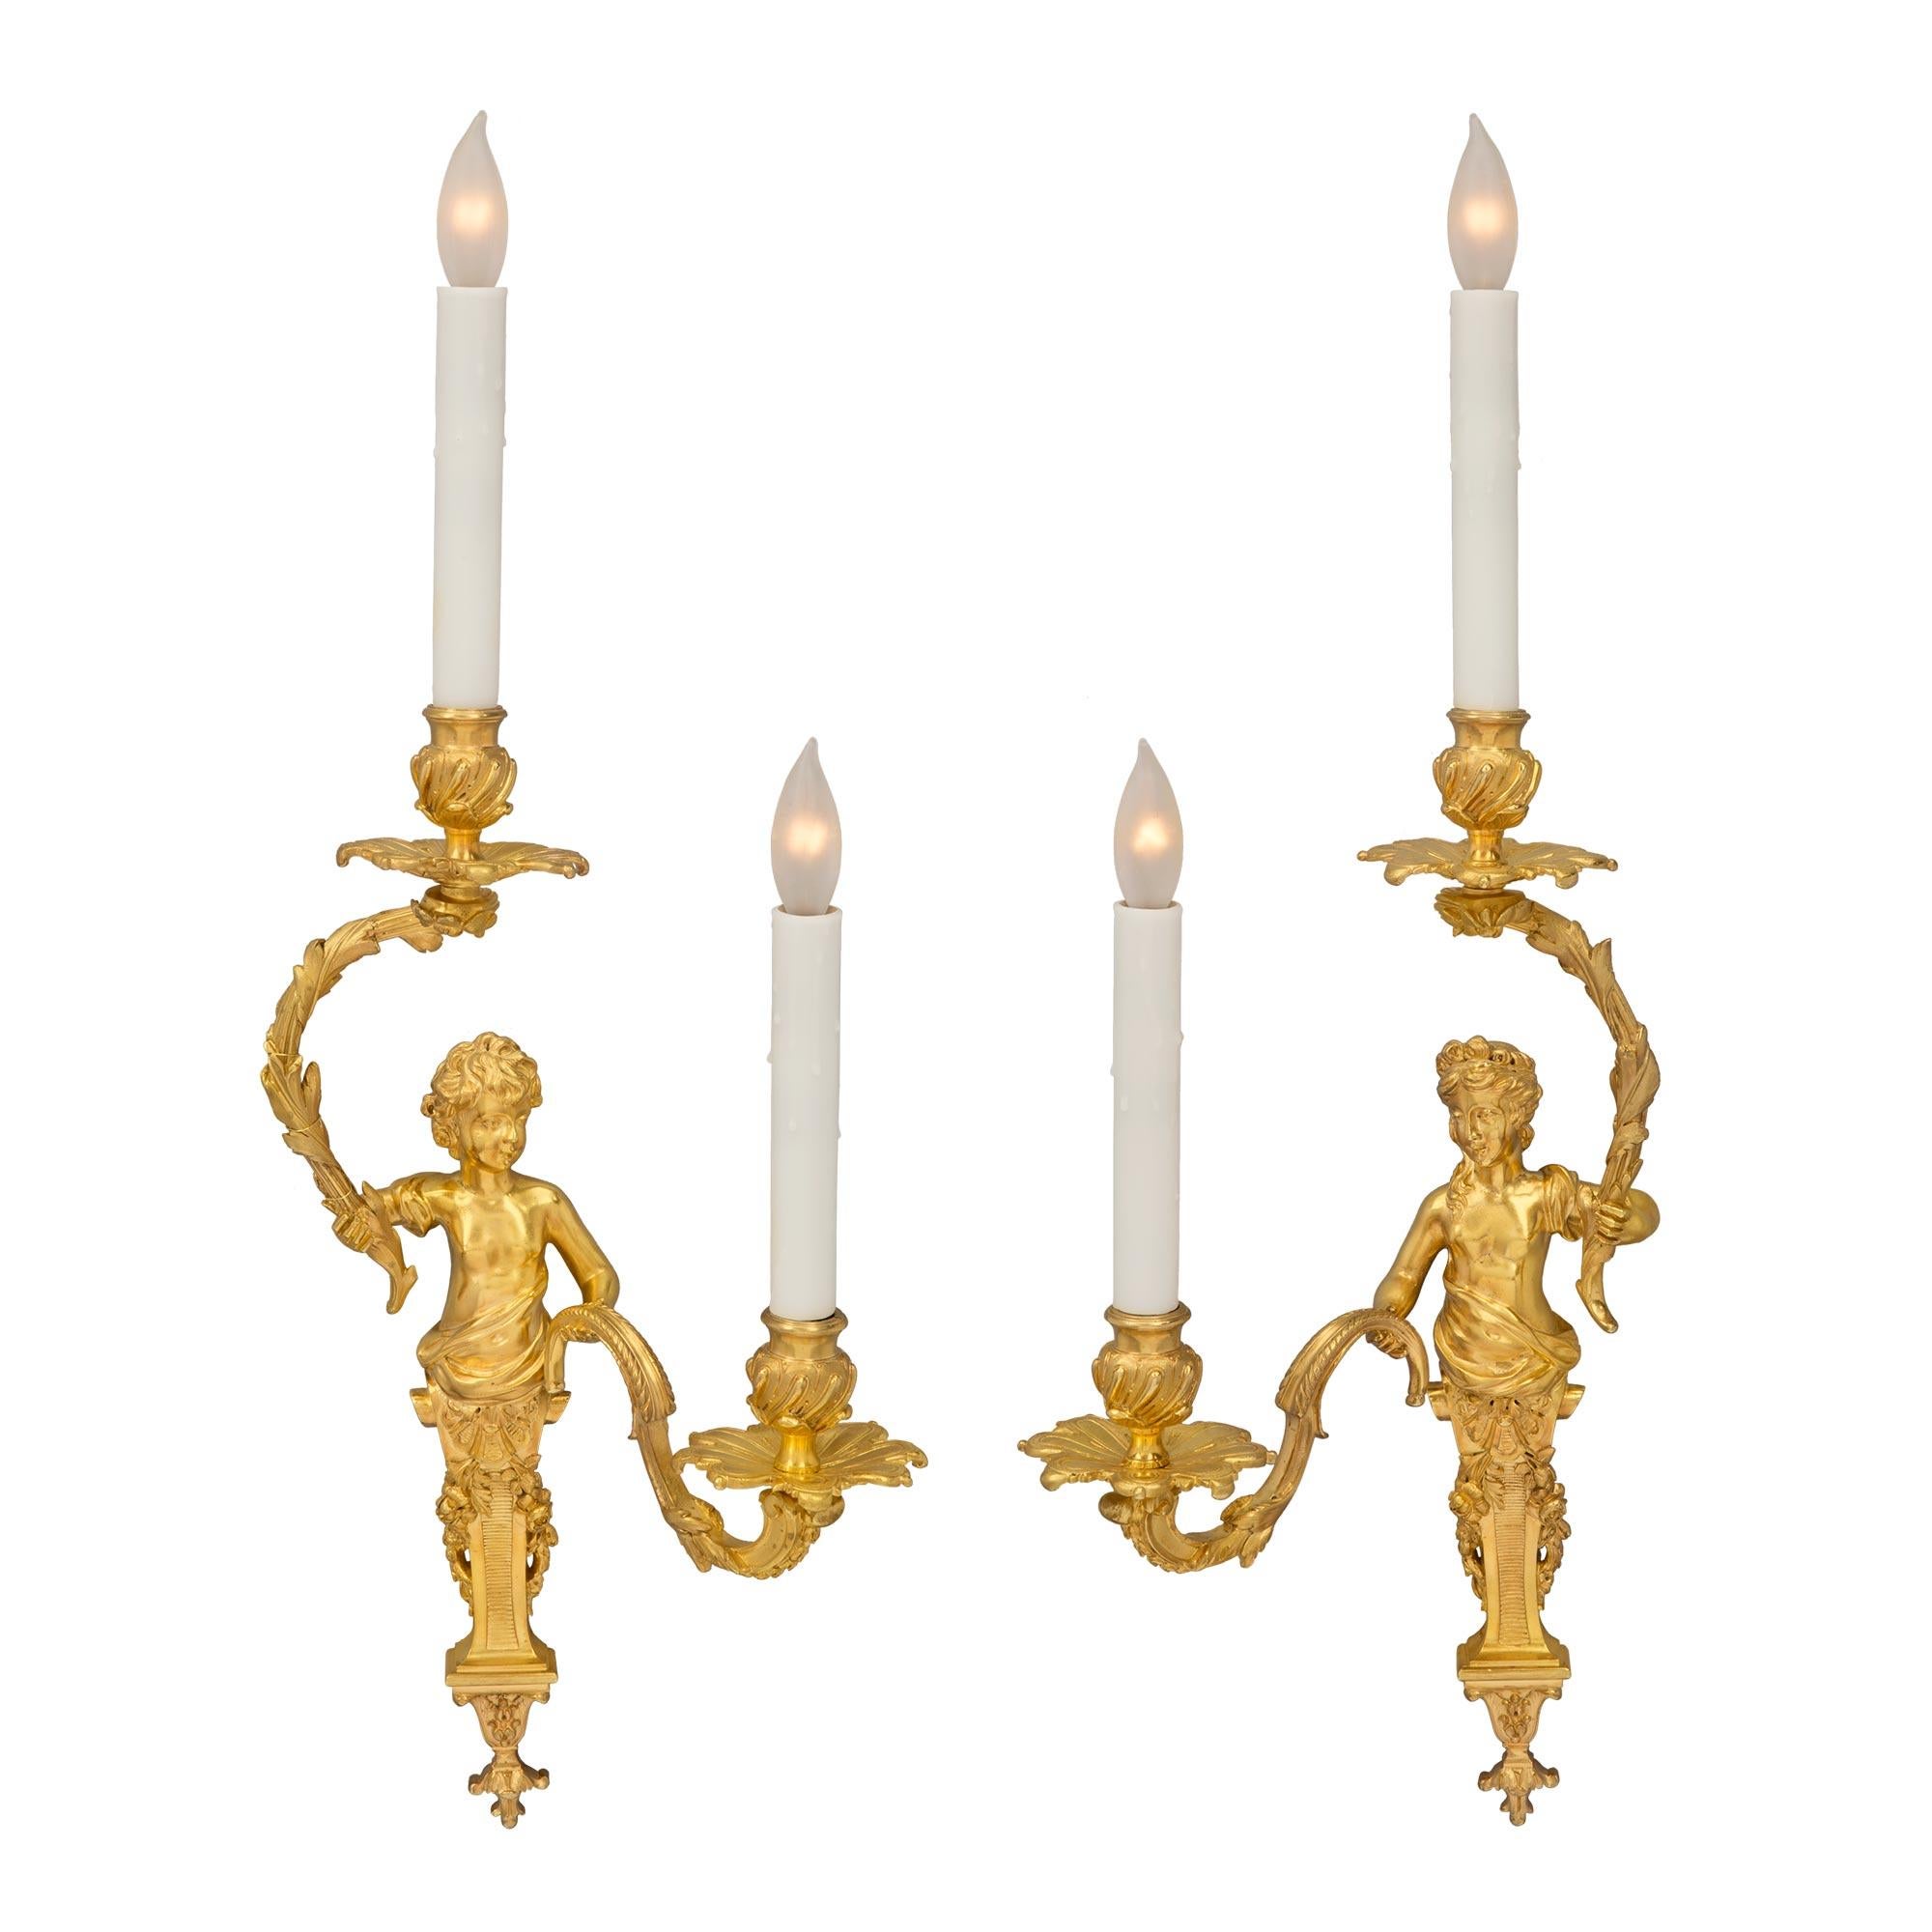 A striking and high quality true pair of French 19th century Louis XVI st. ormolu two arm sconces after a model by Gilles-Marie Oppenordt and attributed to Henry Dasson. Each sconce is centered by a lovely foliate bottom finial below the elegant